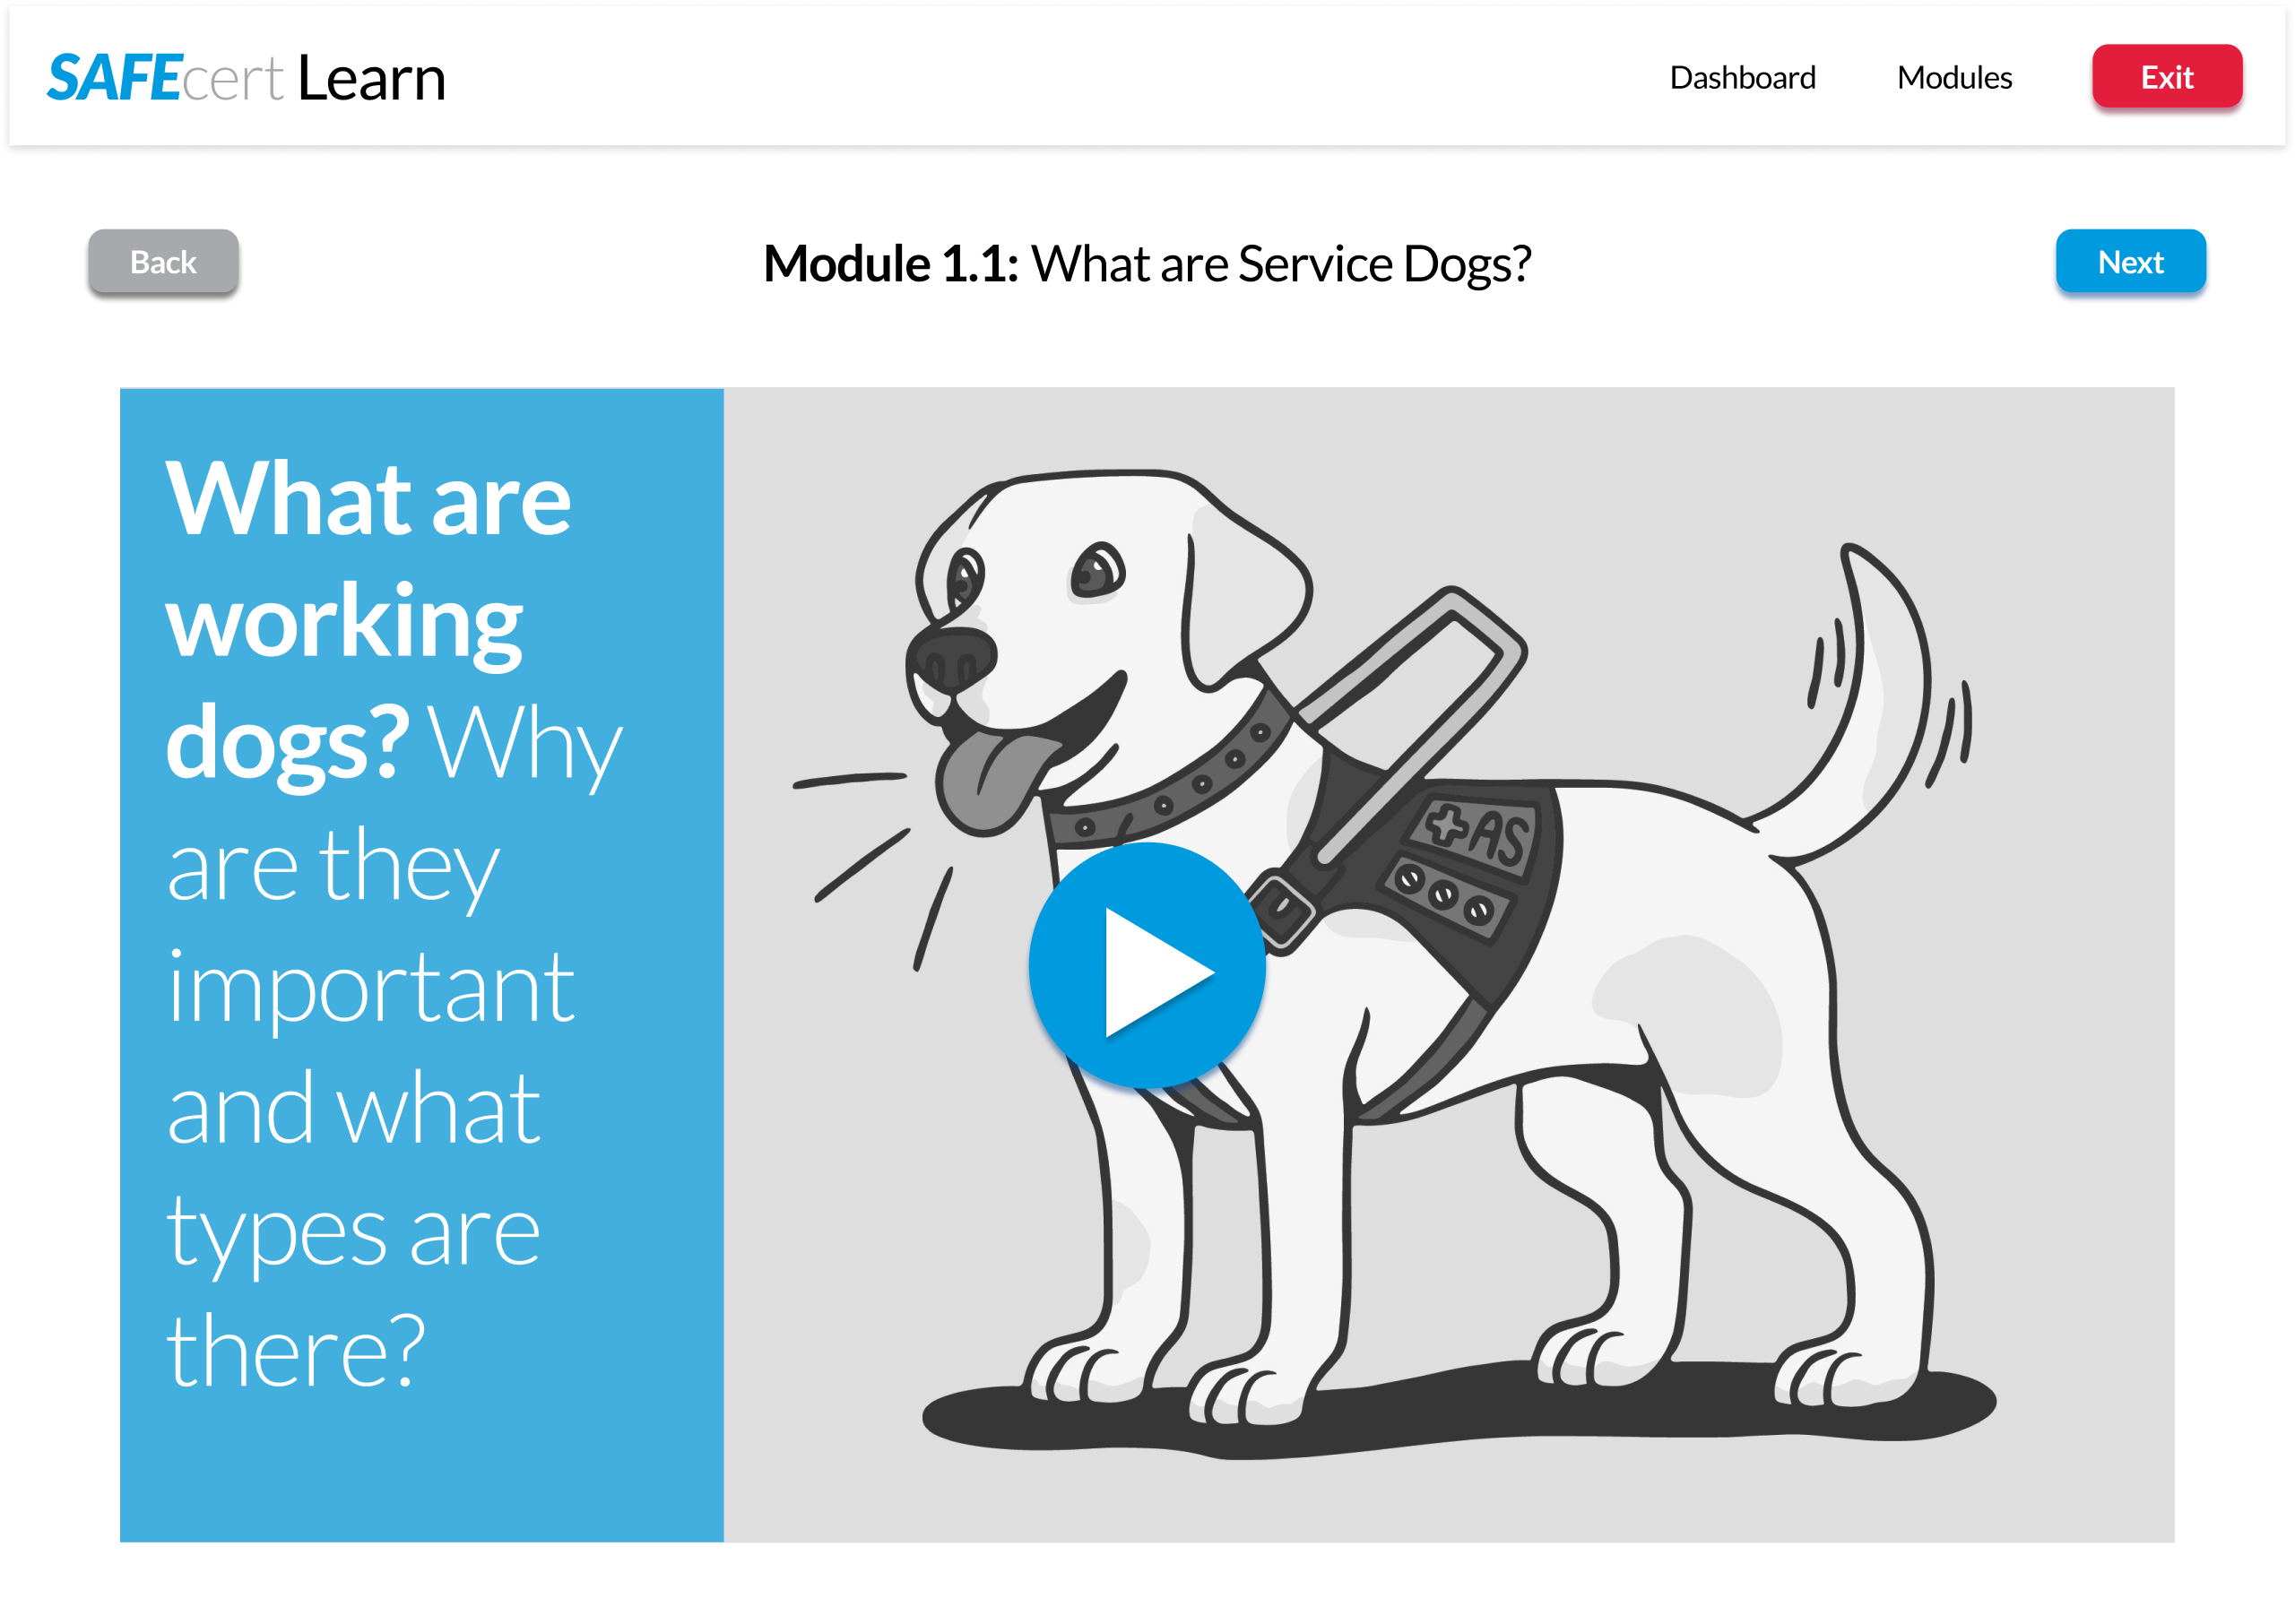 Training video section of the safecert learning portal. Module label at the top and video player with gray service dog cartoon